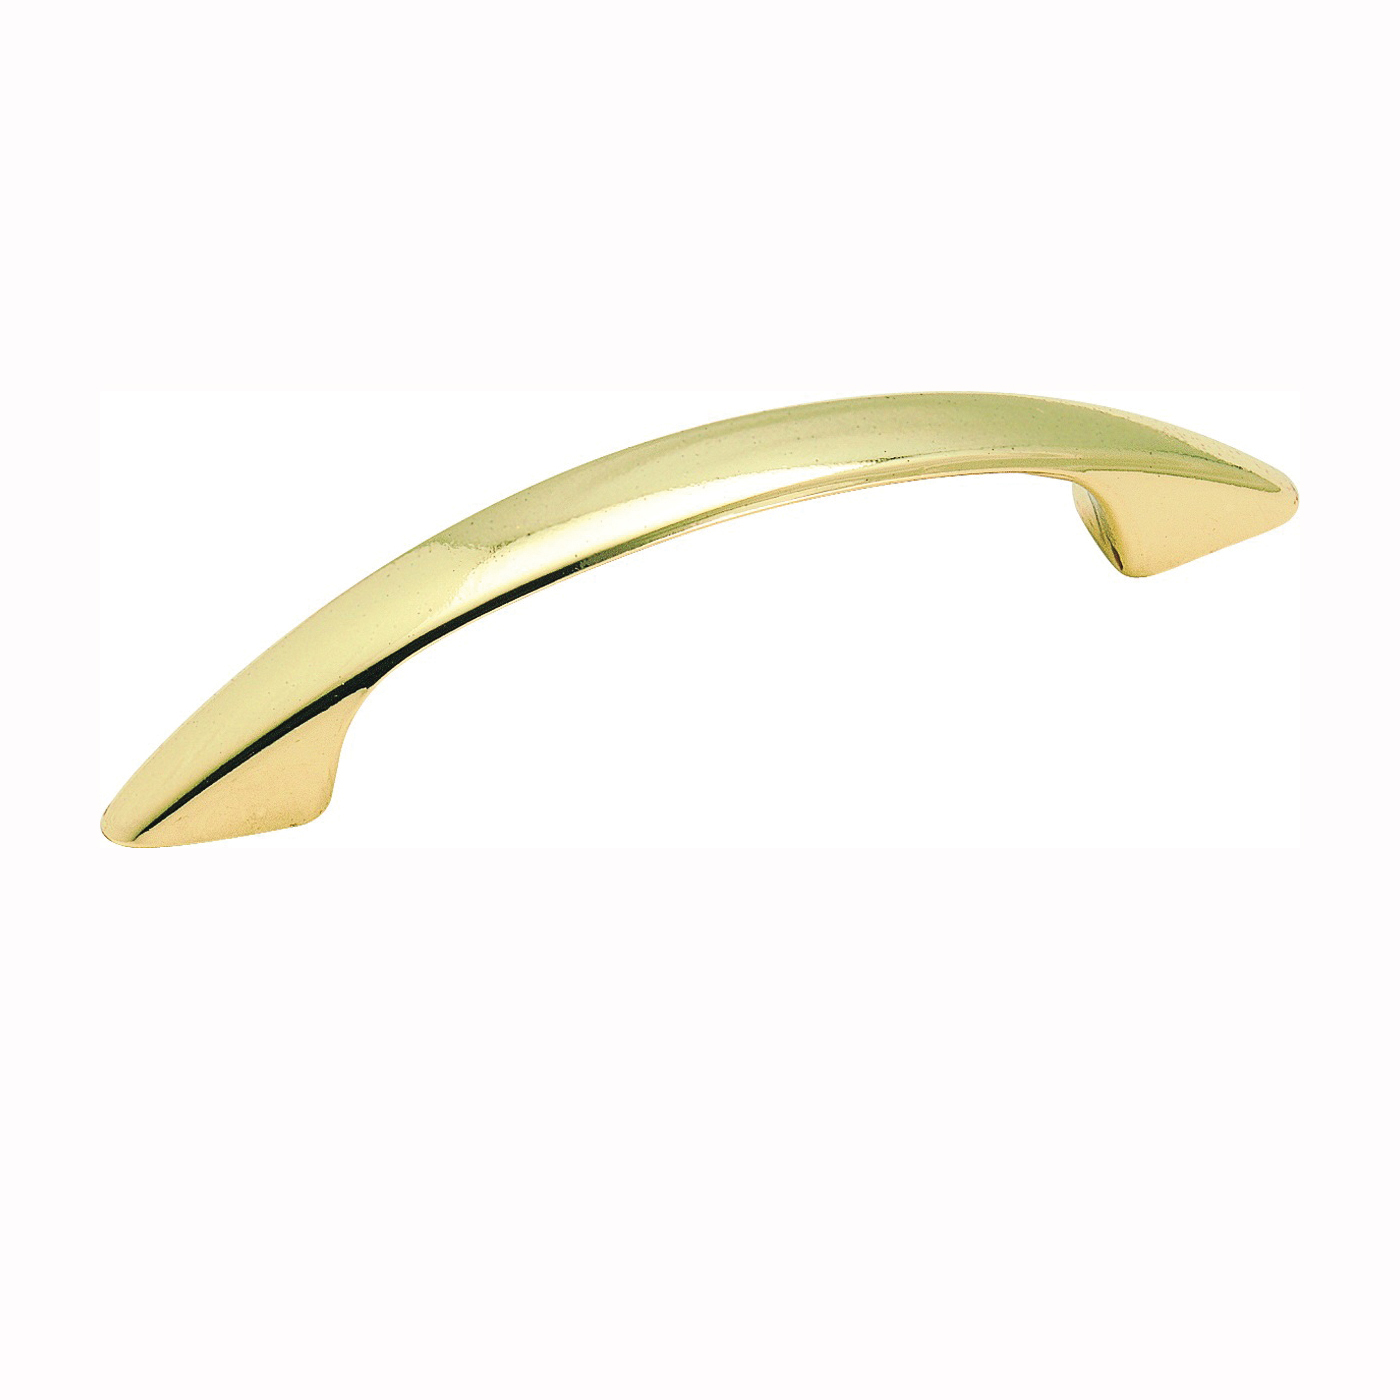 BP34163 Cabinet Pull, 4-1/16 in L Handle, 3/4 in H Handle, 3/4 in Projection, Zinc, Polished Brass